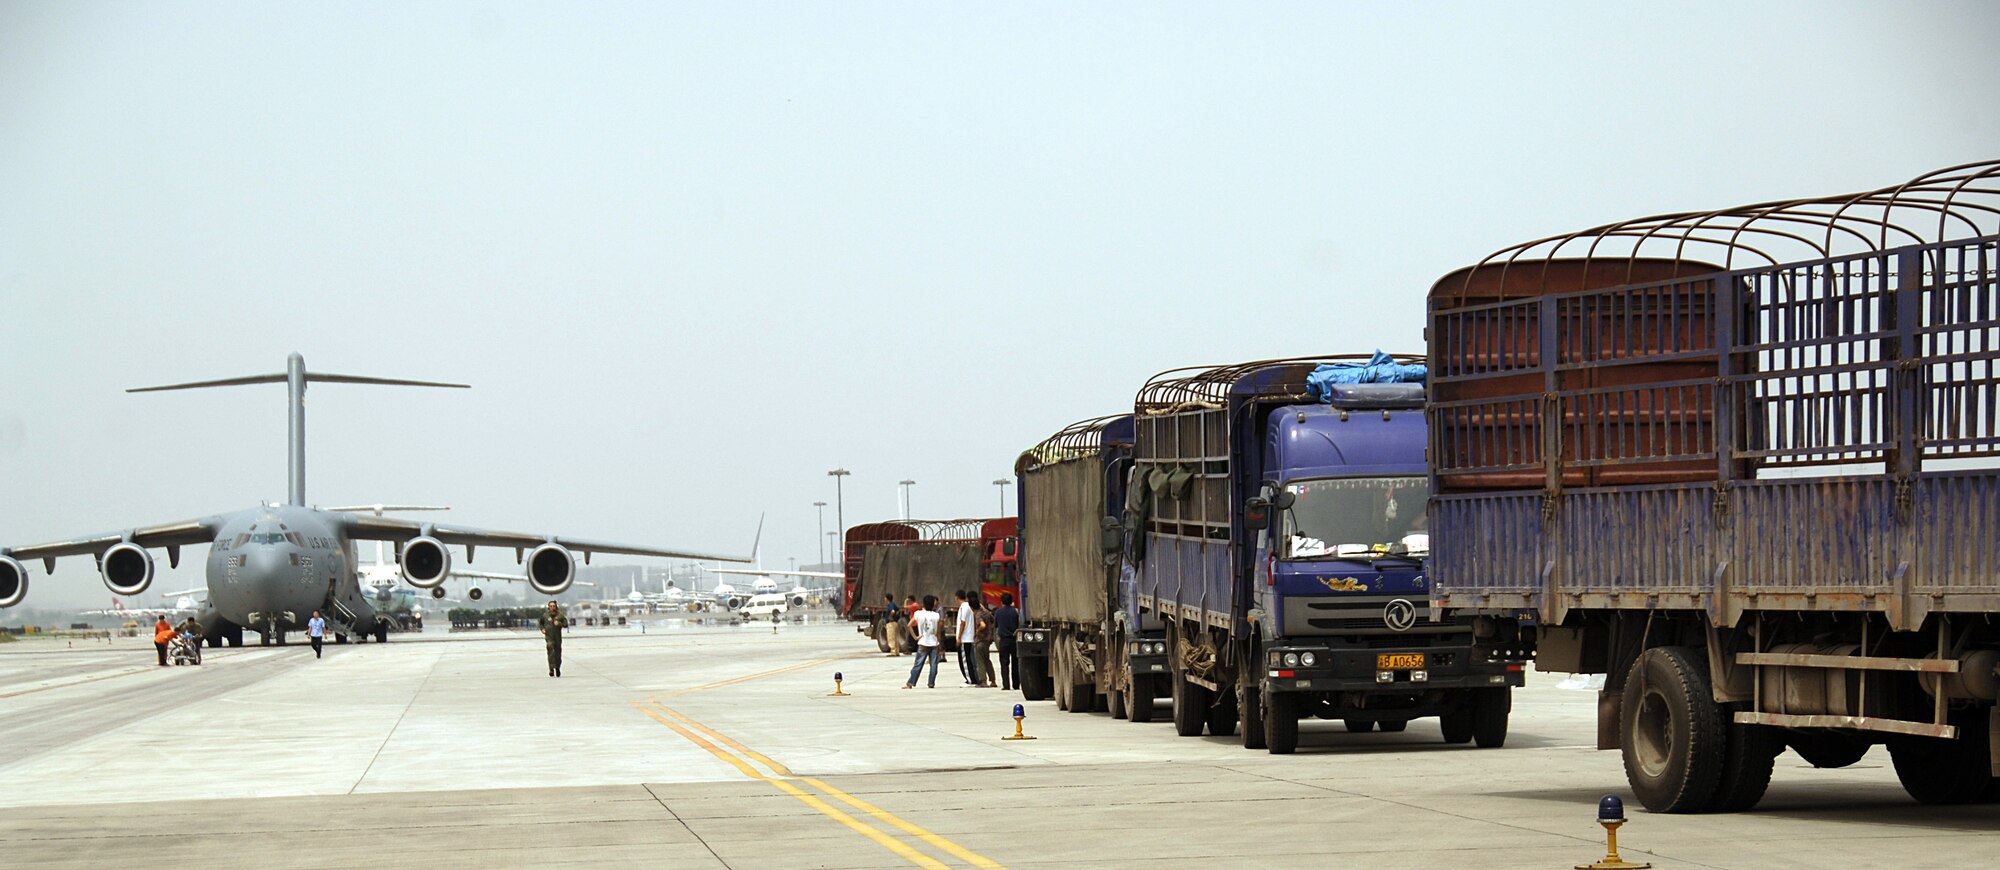 Several personnel from various organizations helped move and palletize five truck loads of FEMA supplies for relief efforts in China. The 18 pallets of supplies, which included lanterns, tents, chain saws and generators were unloaded from an United States Air Force C-17 aircraft and loaded into Chinese trucks. The supplies are to be delivered to the victims of the earthquake in Sichuan, China. (U.S. Air Force photo by Senior Airman Steven Donatelli)
